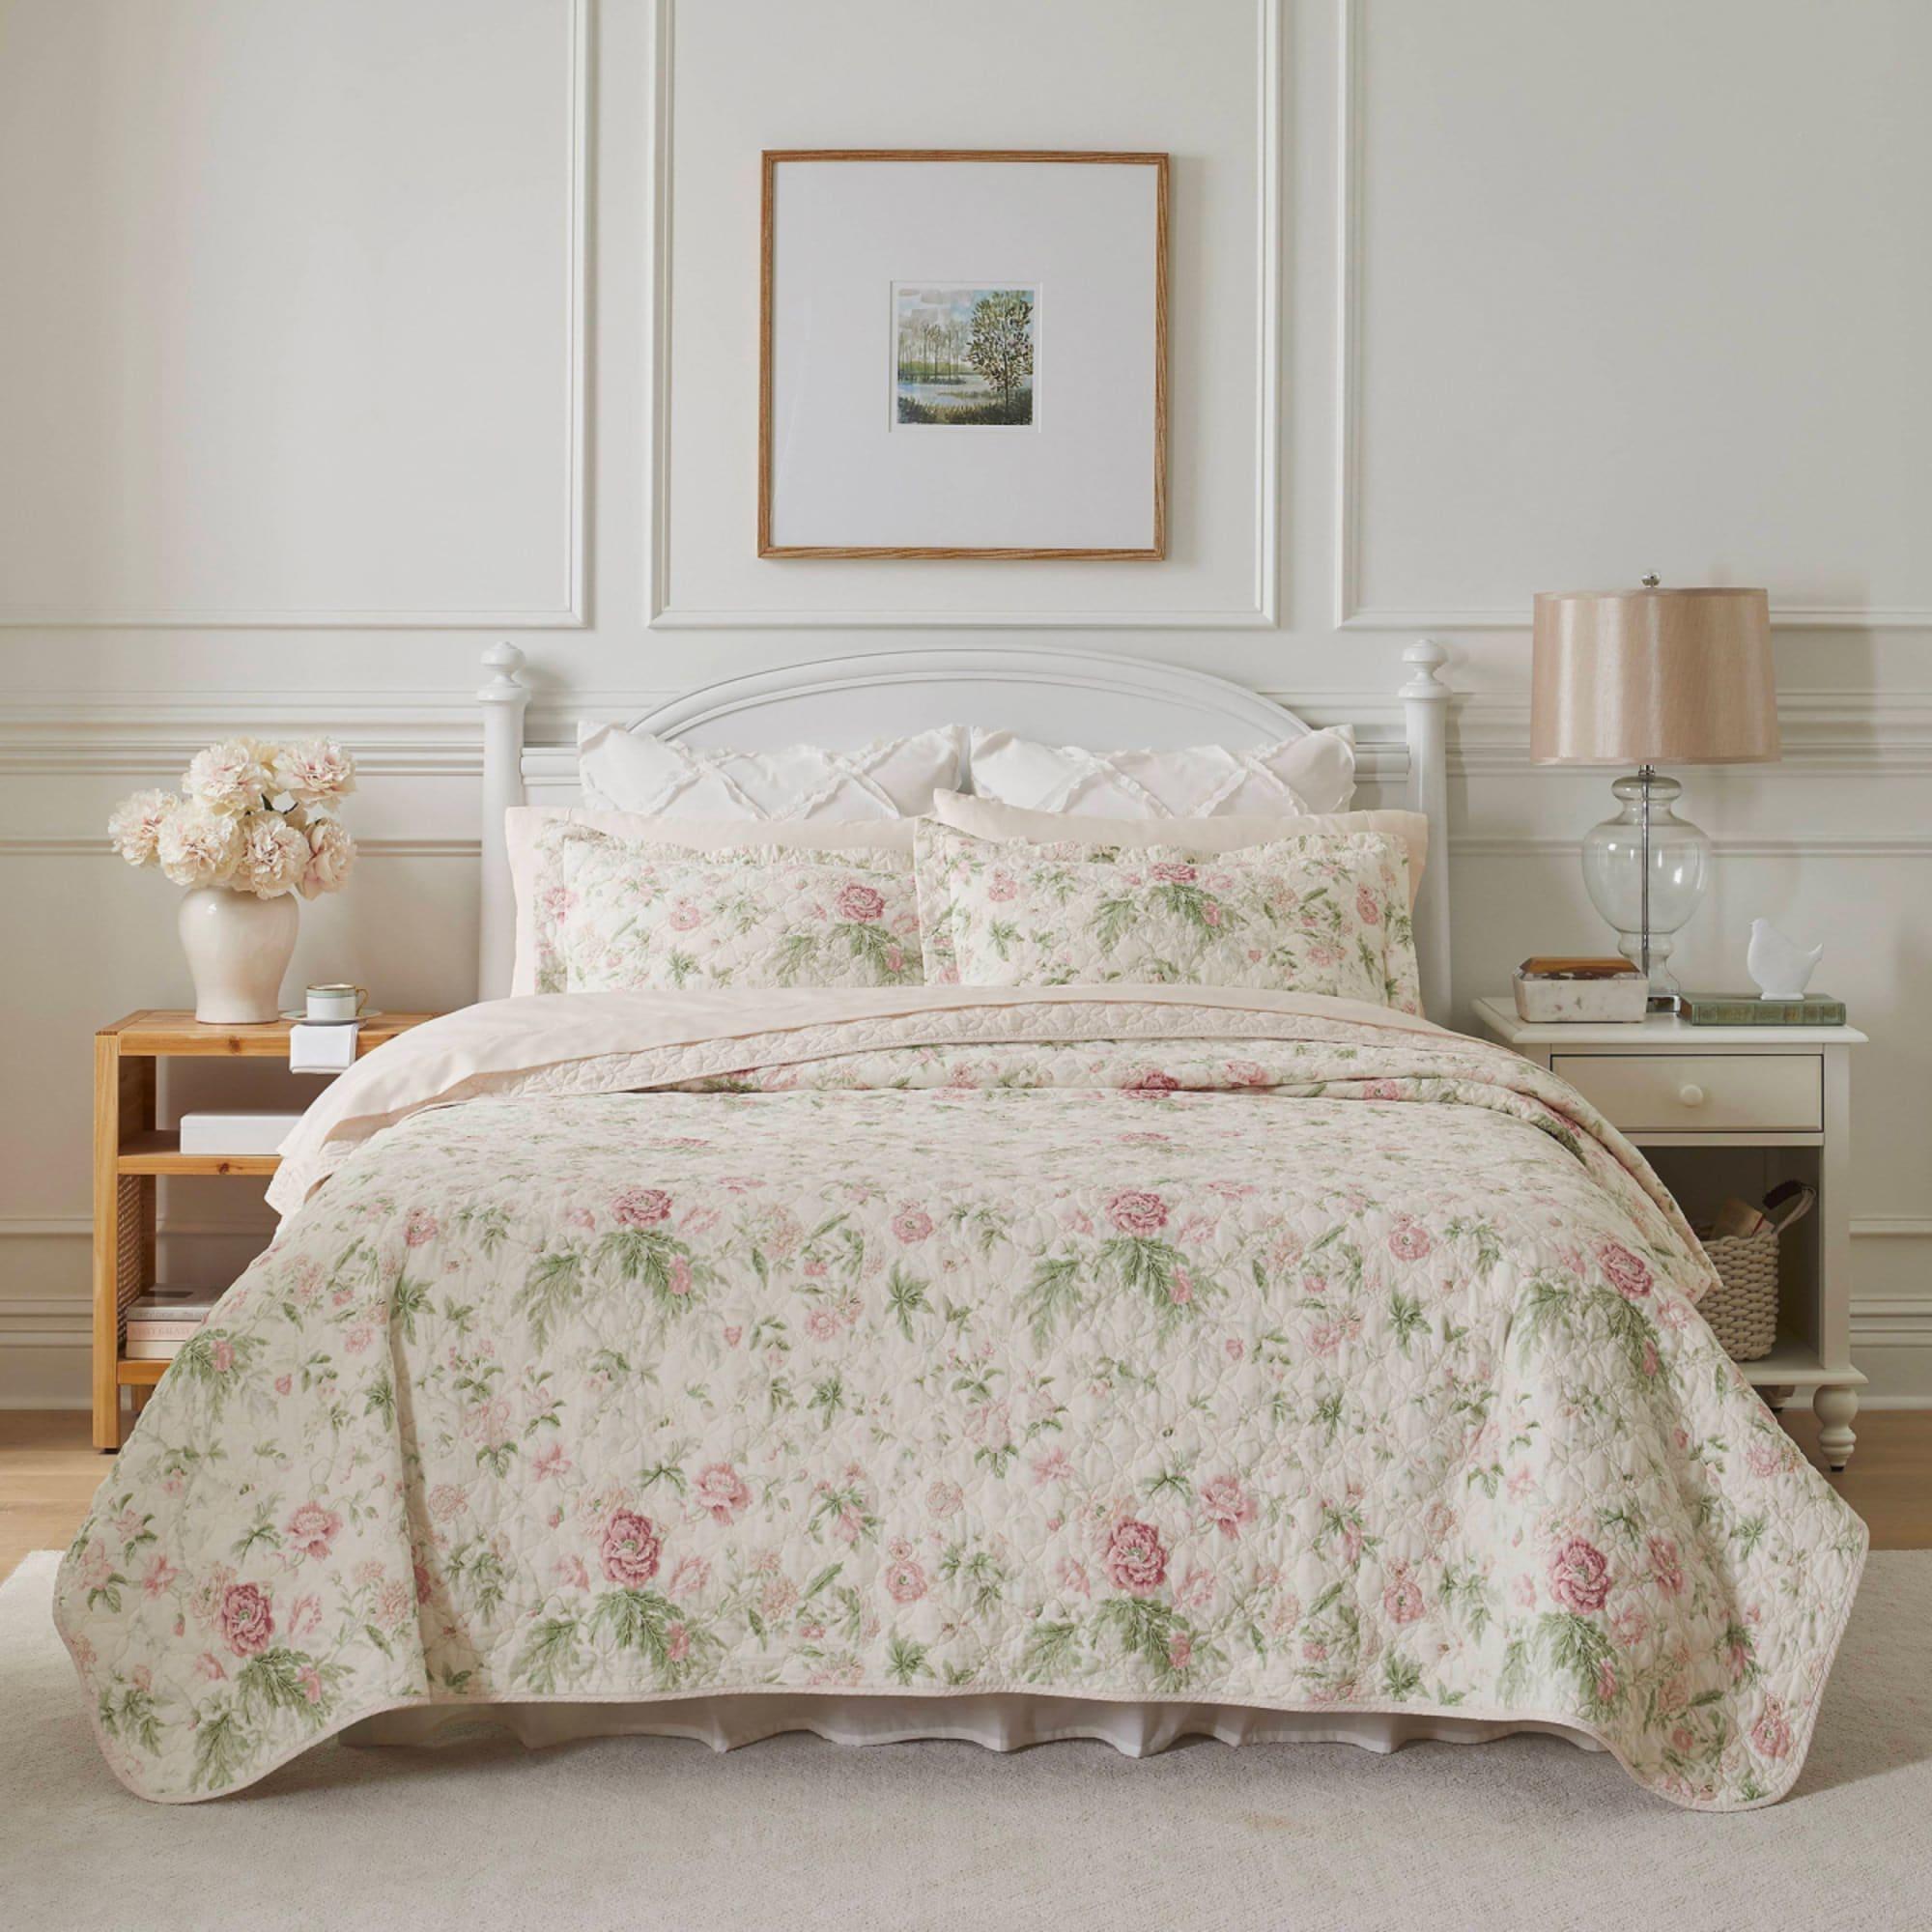 Laura Ashley Breezy Floral Printed Coverlet Set Queen Image 1